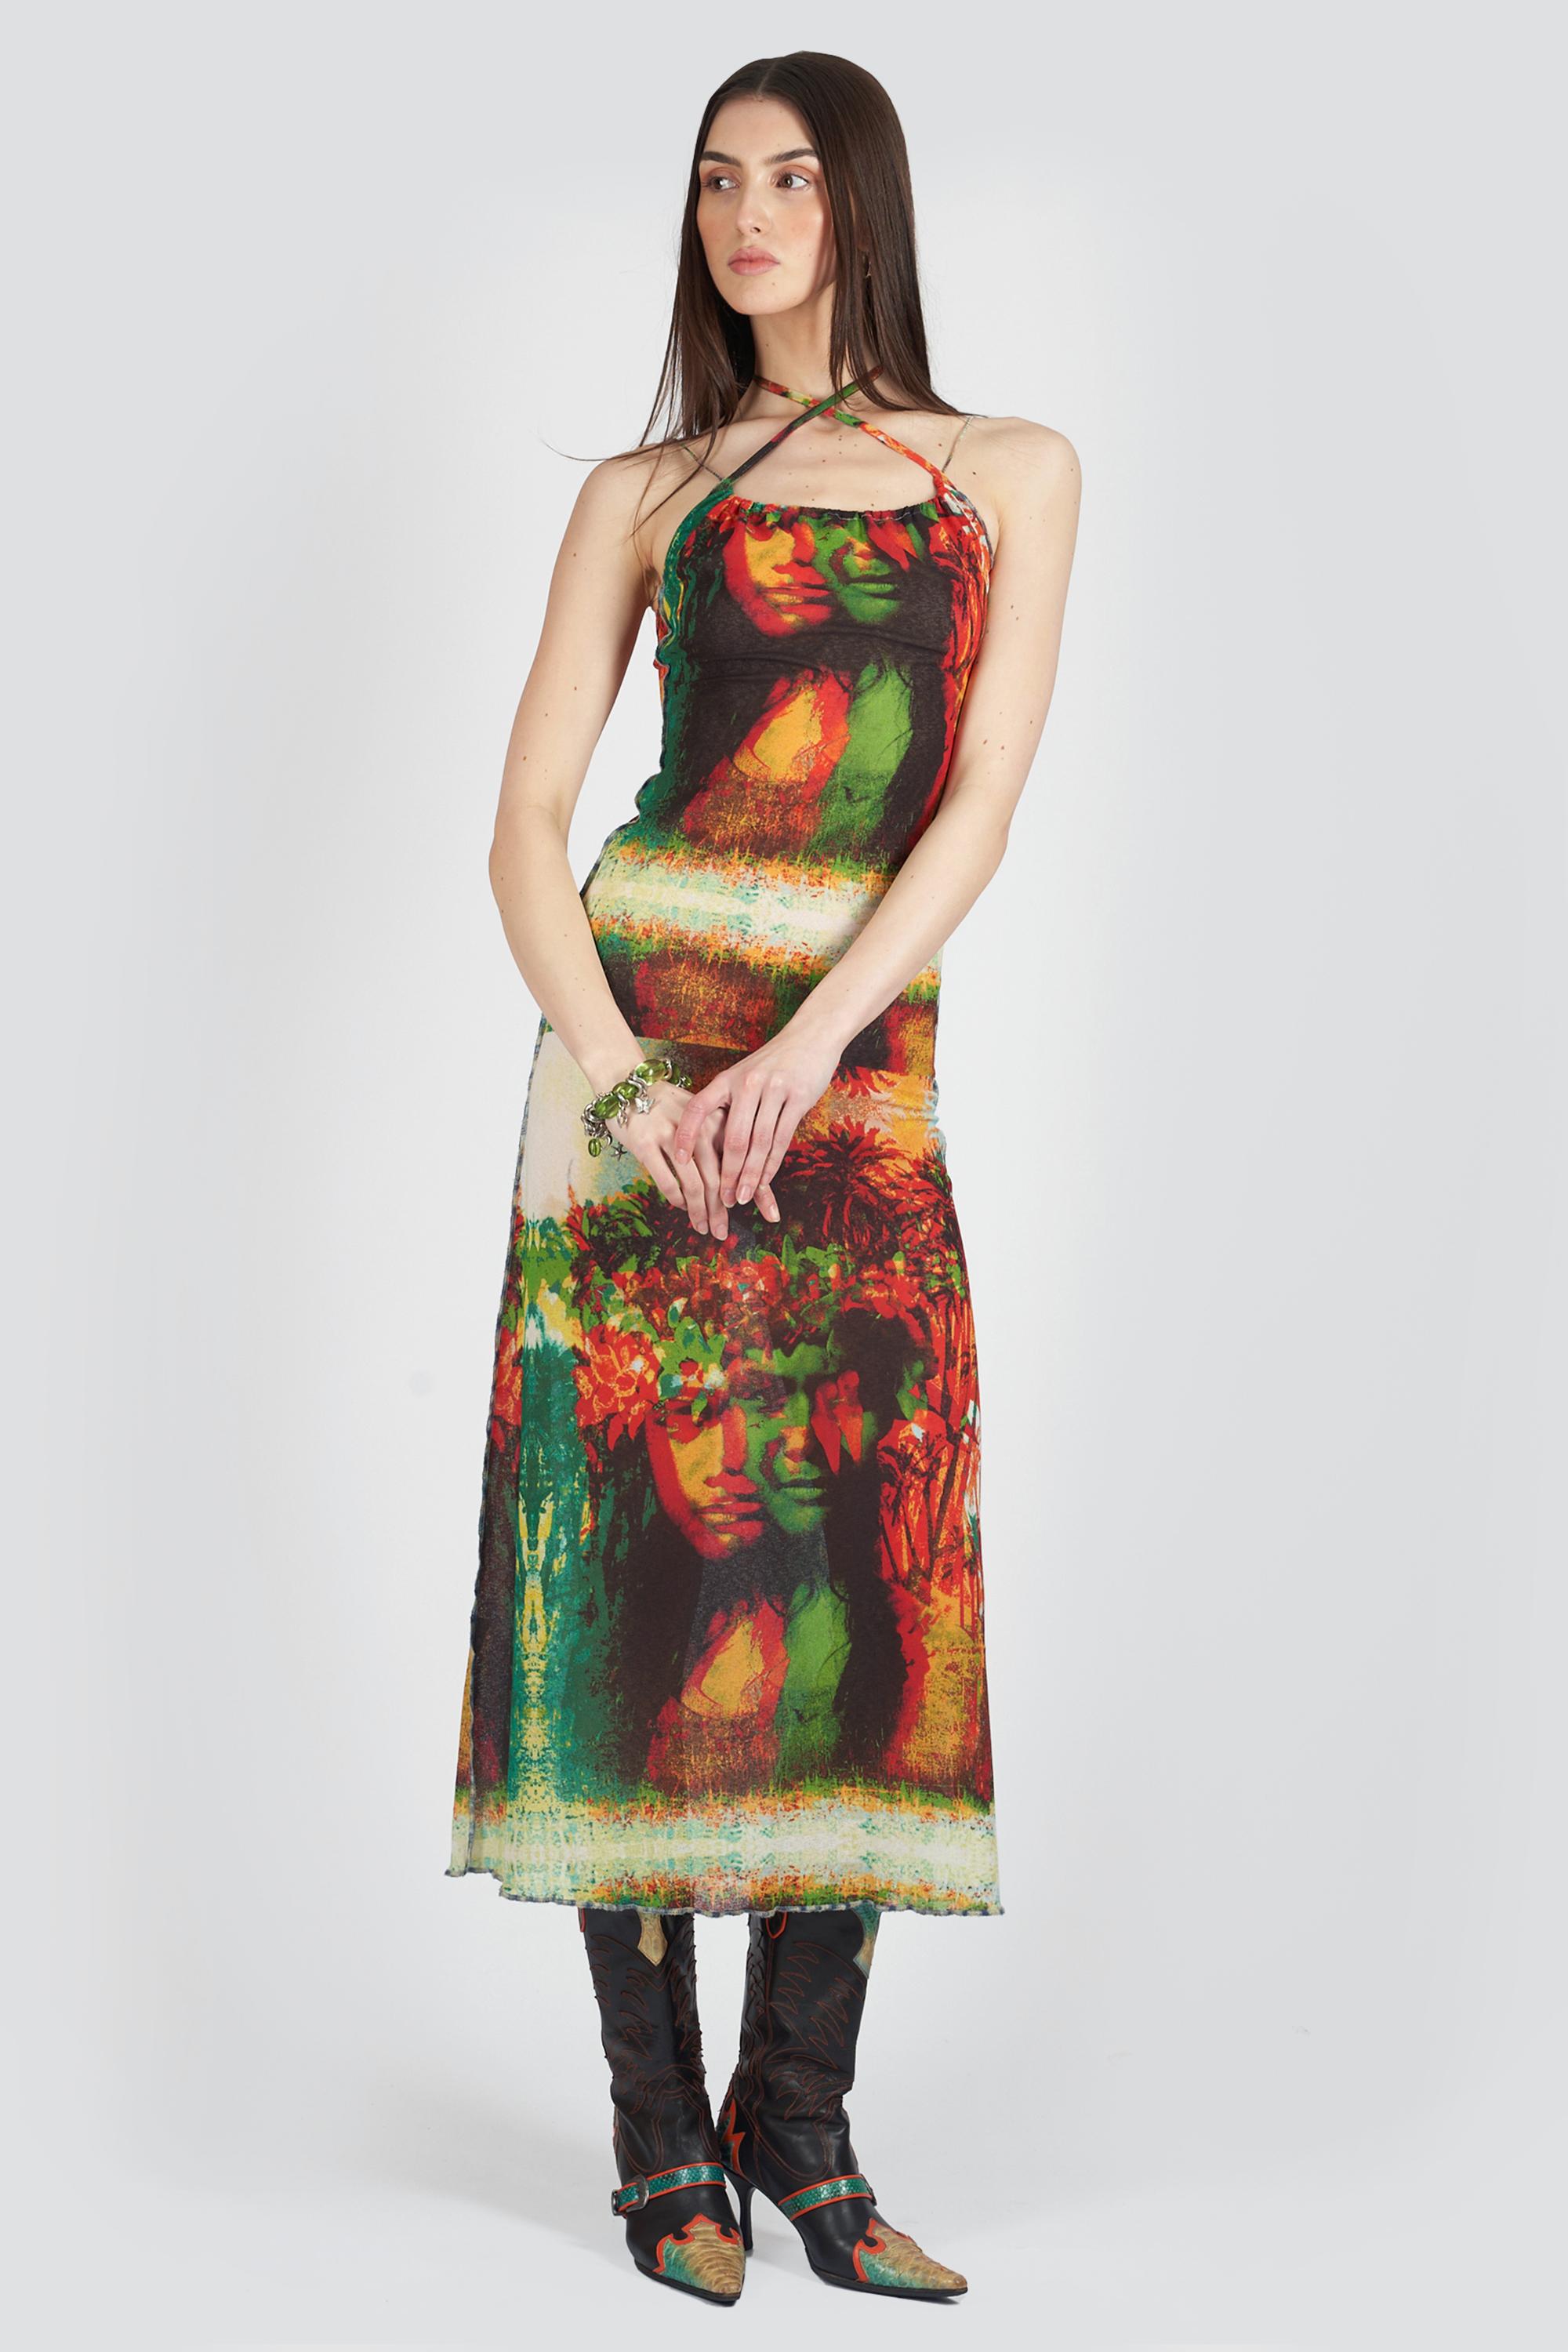 Vintage S/S 2000 Runway Psychedelic Faces Mesh Dress In Excellent Condition For Sale In London, GB